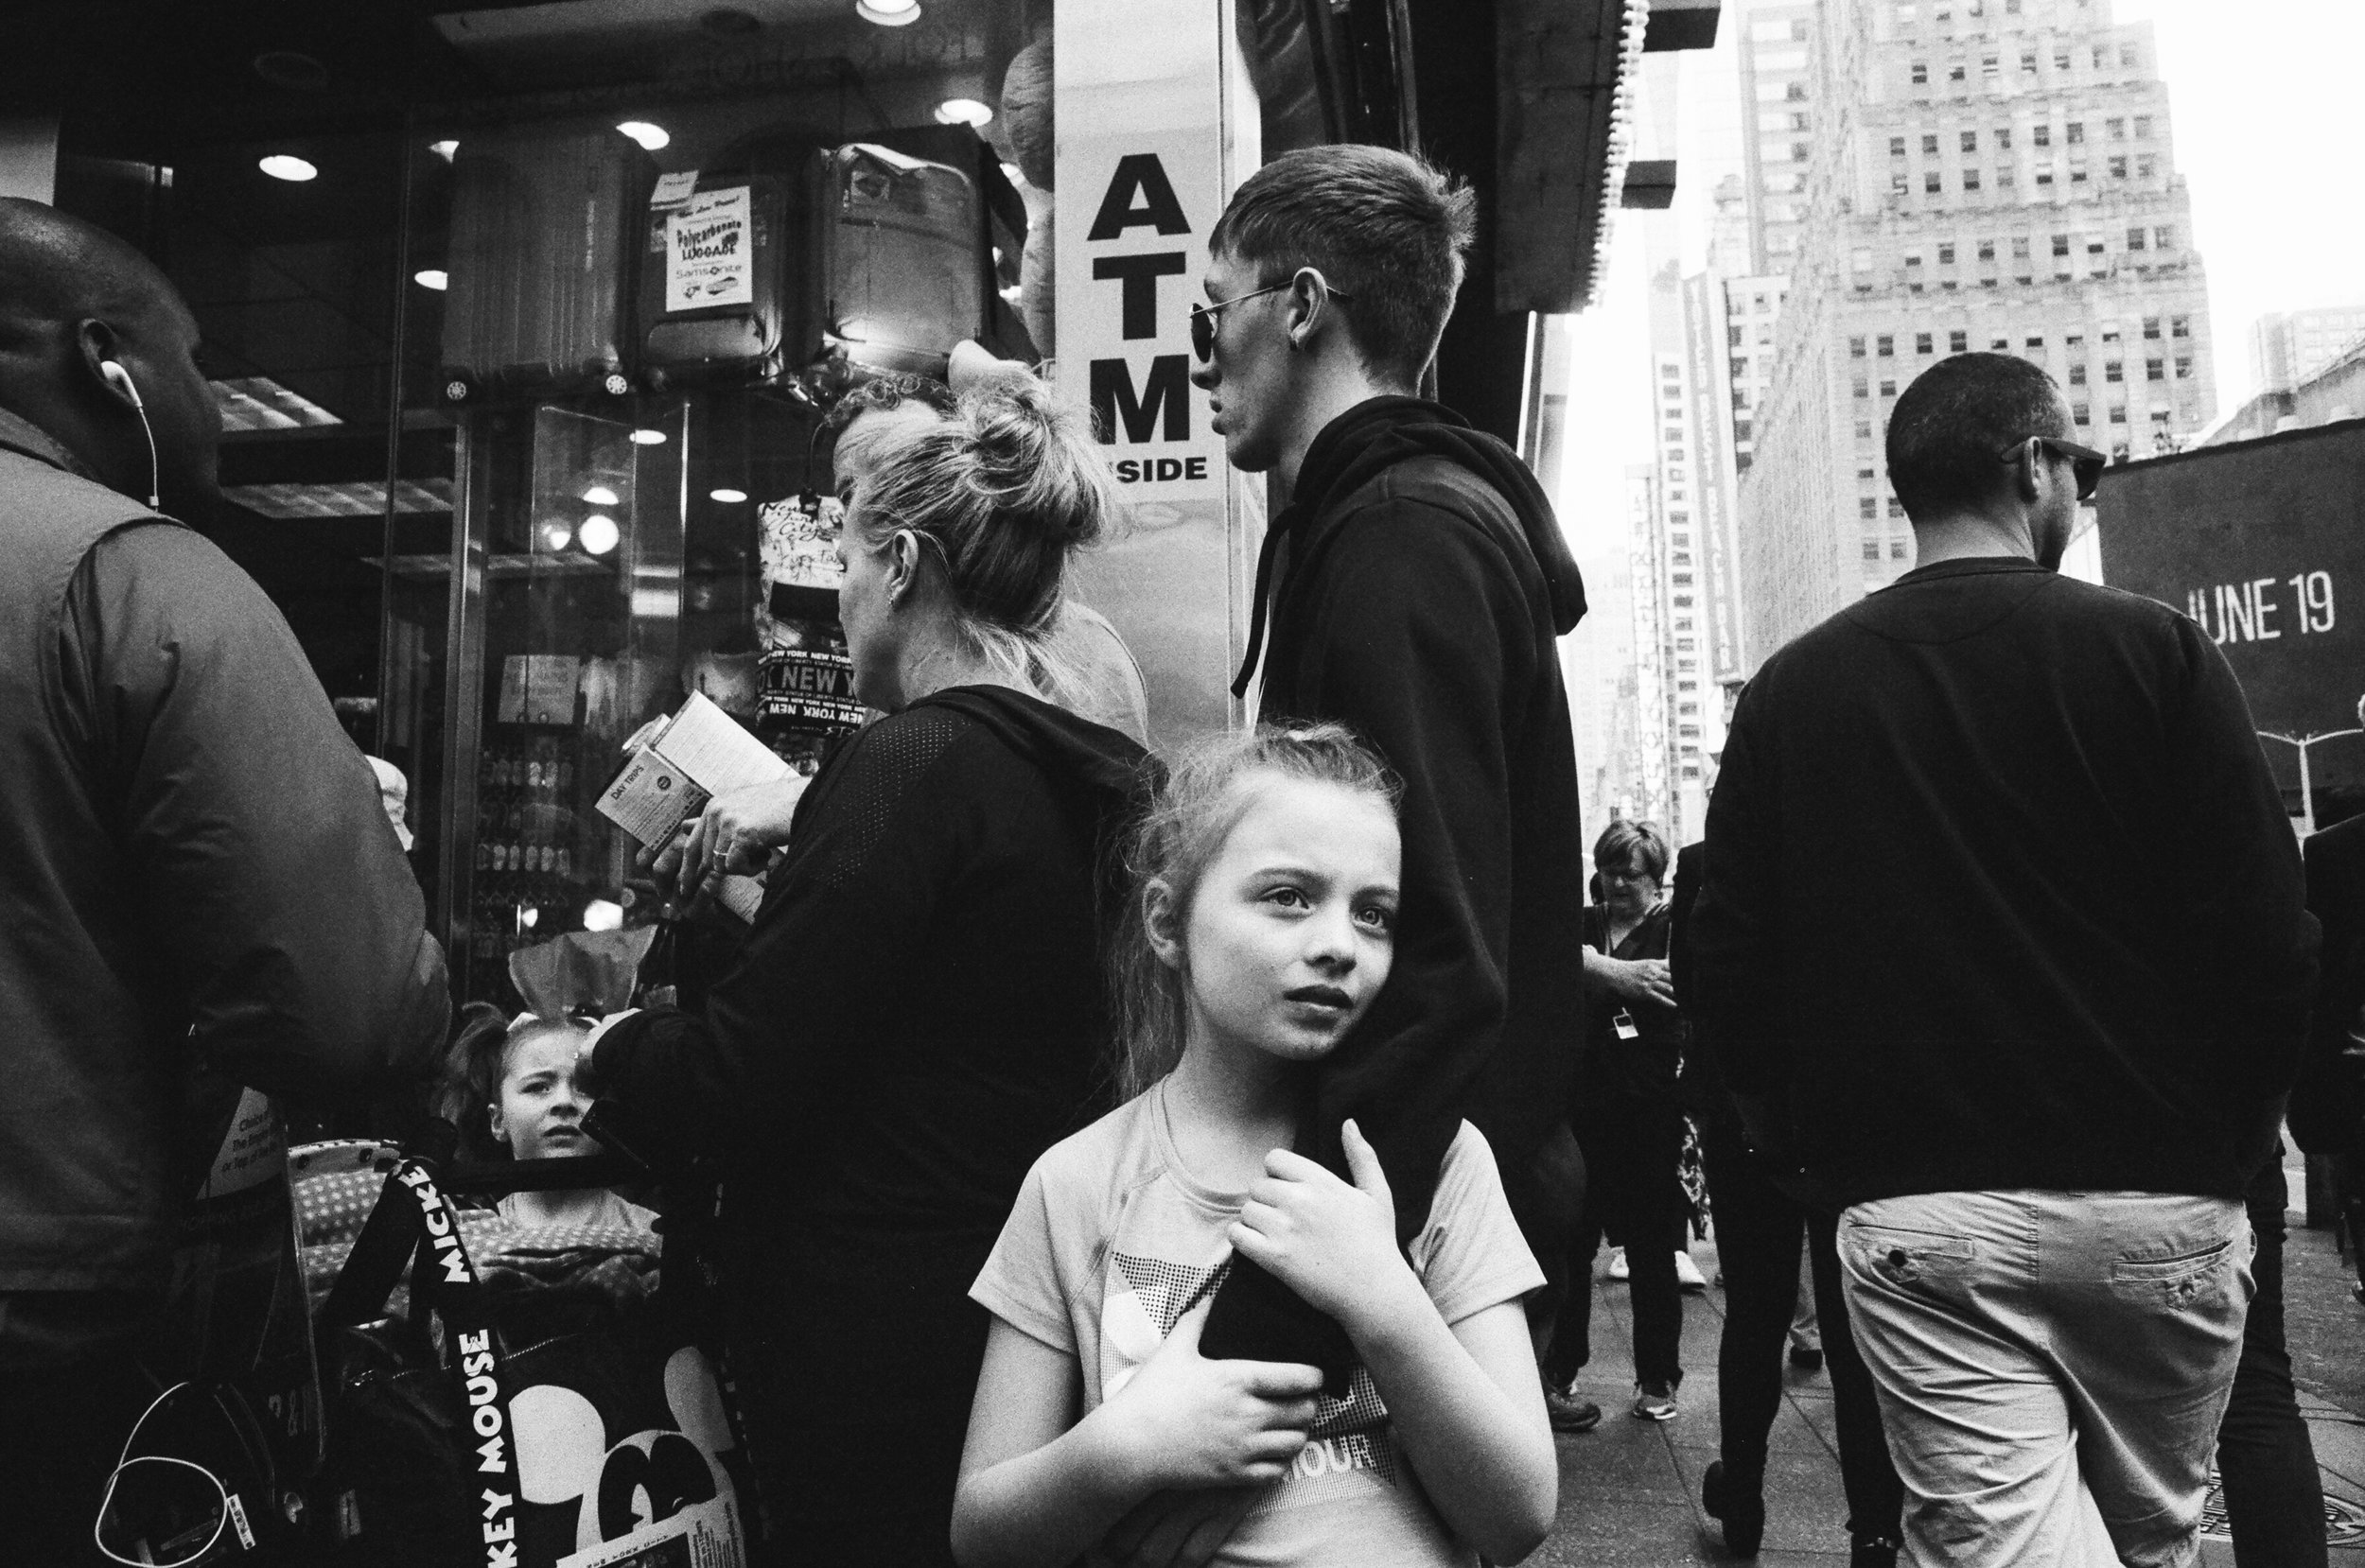 “Child gazing towards the lights of time square”&nbsp;by Joe Greer